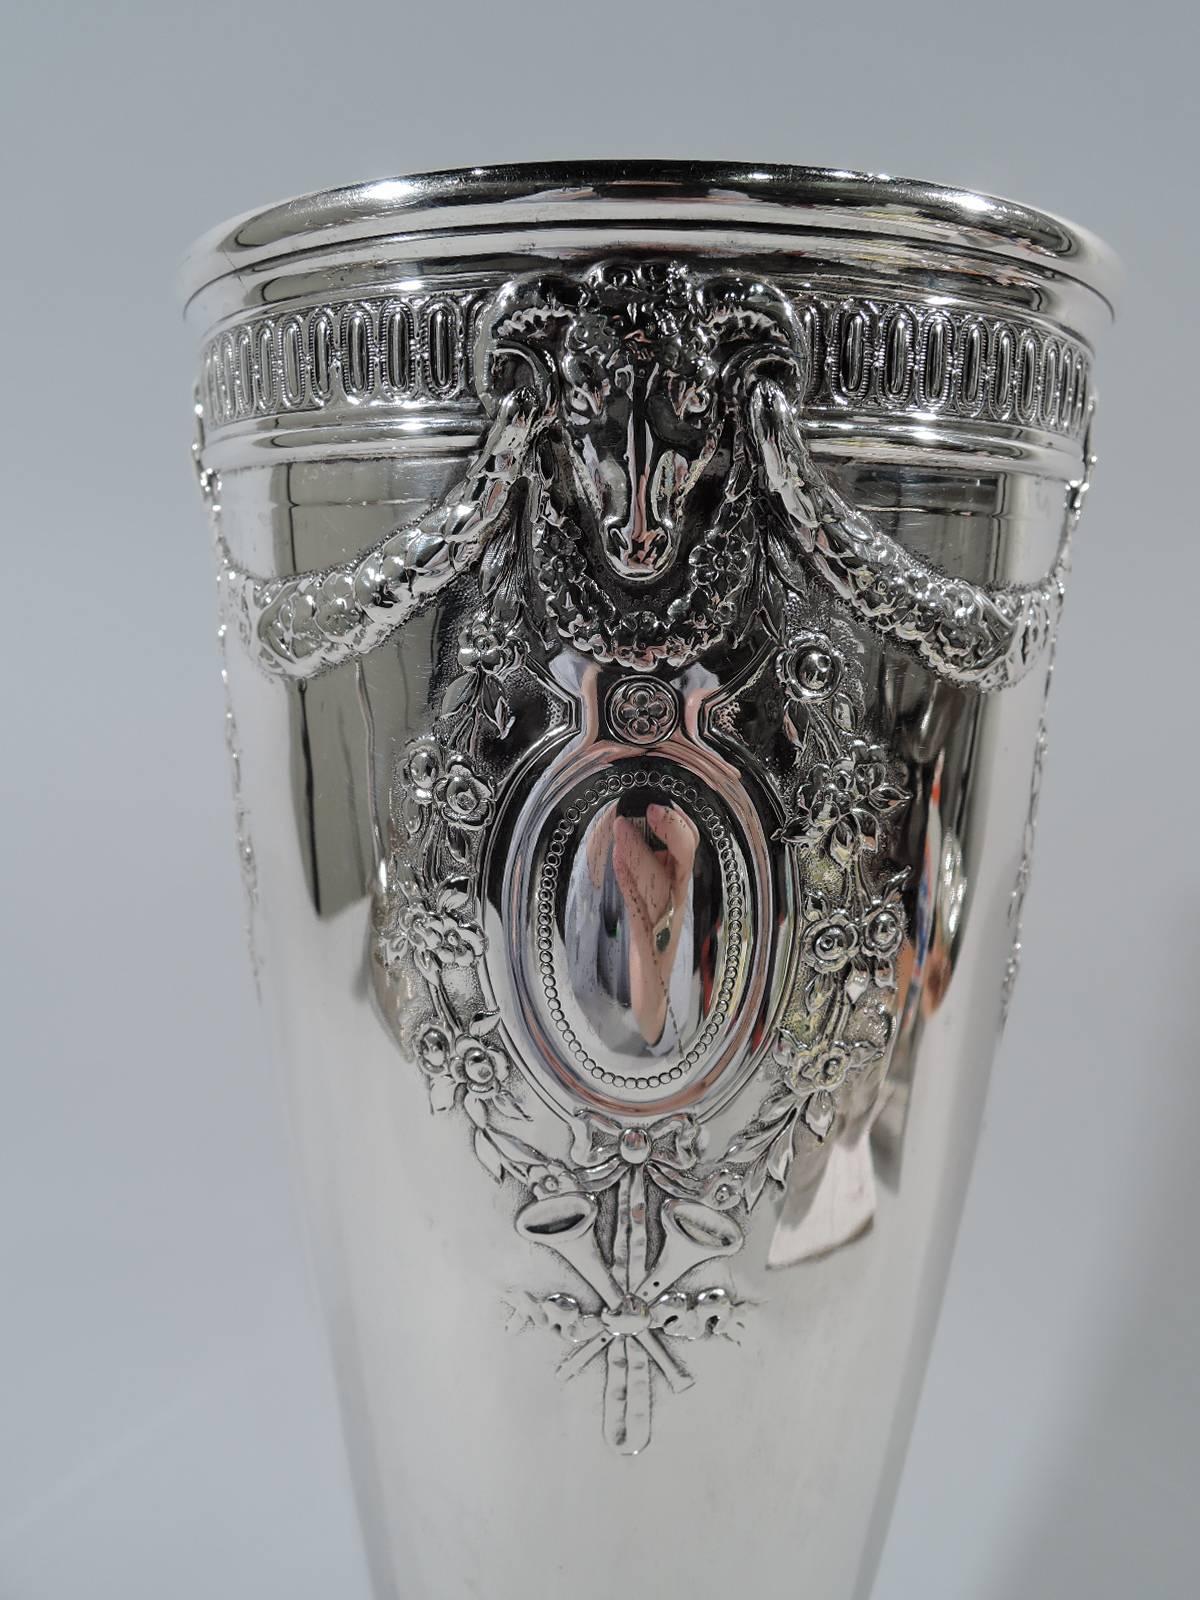 Edwardian sterling silver vase. Made by Tiffany & Co. in New York, circa 1914. Curved and tapering sides, lobed knop and stepped and raised foot. Chased, repousse and applied neoclassical ornament. At top is garland threaded through ram’s heads’